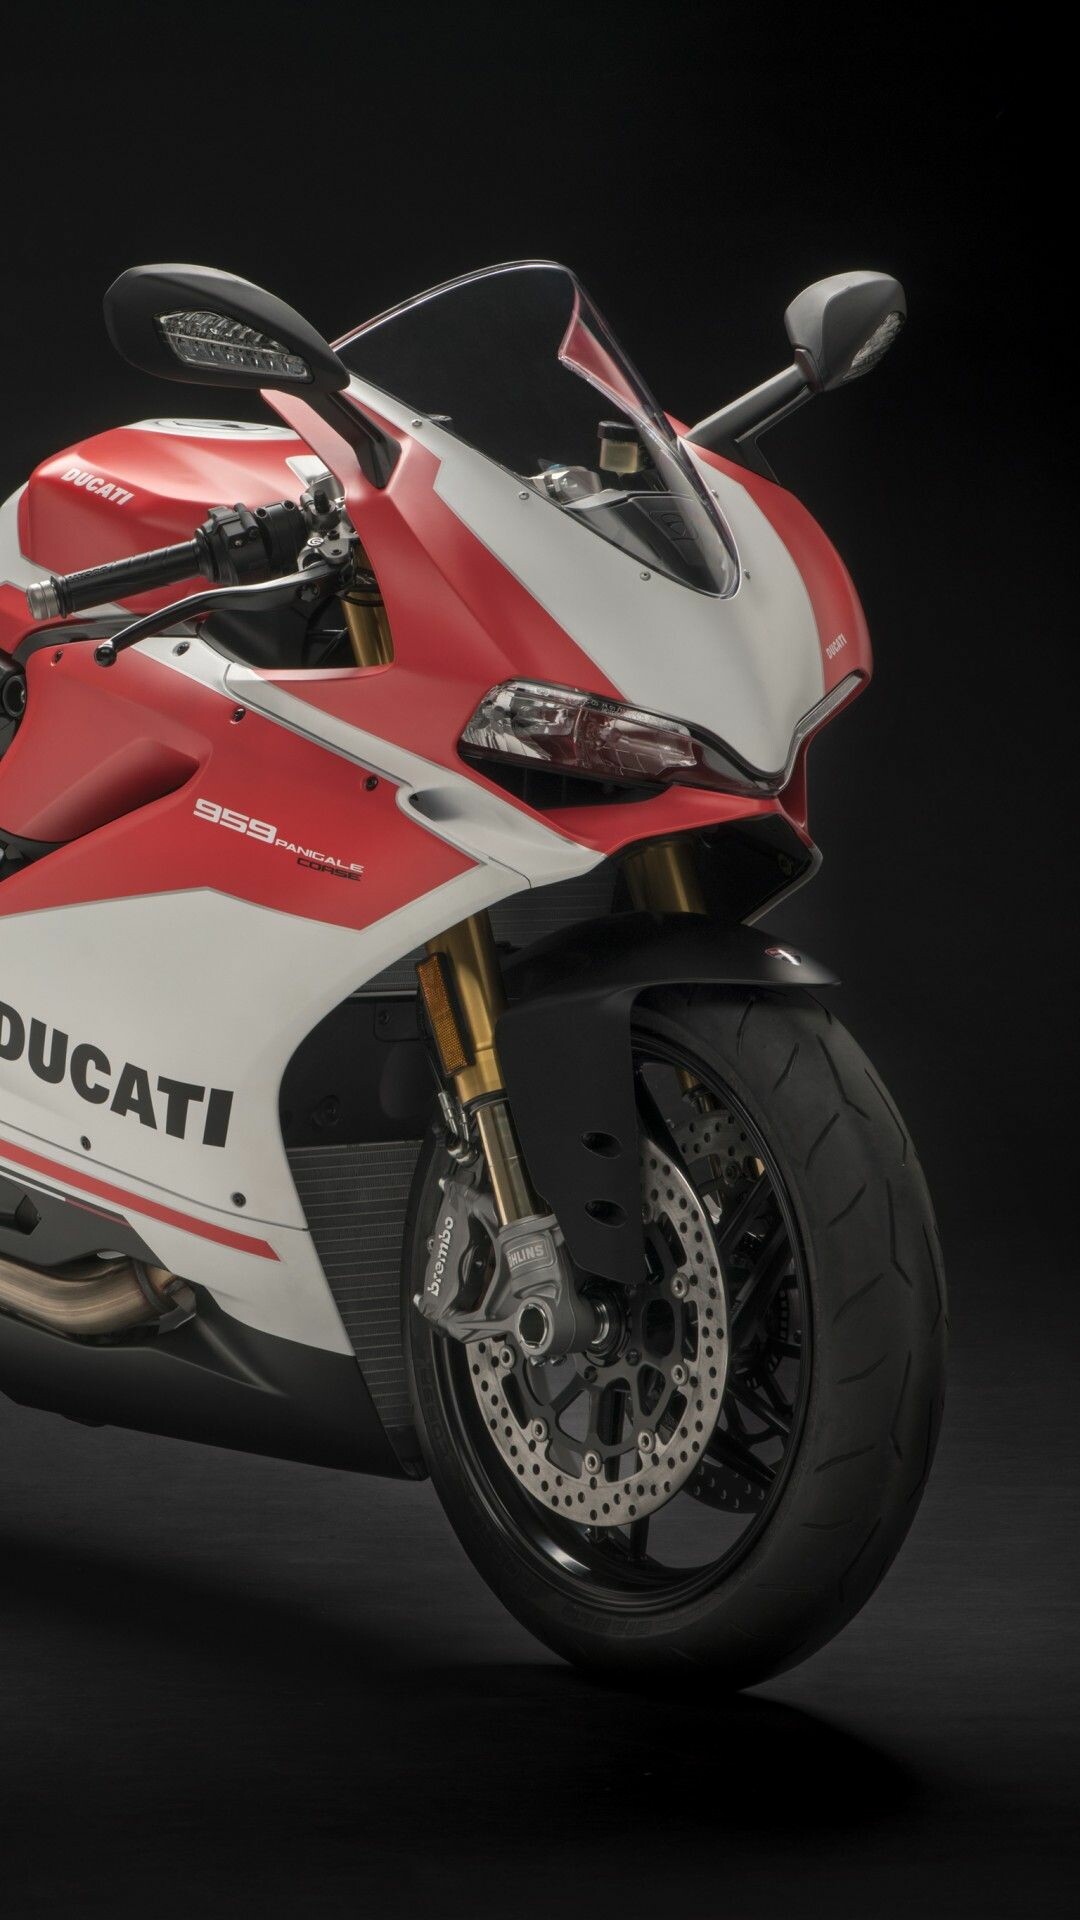 Ducati: 959 model, The motorcycle-manufacturing company, headquartered in Bologna. 1080x1920 Full HD Background.